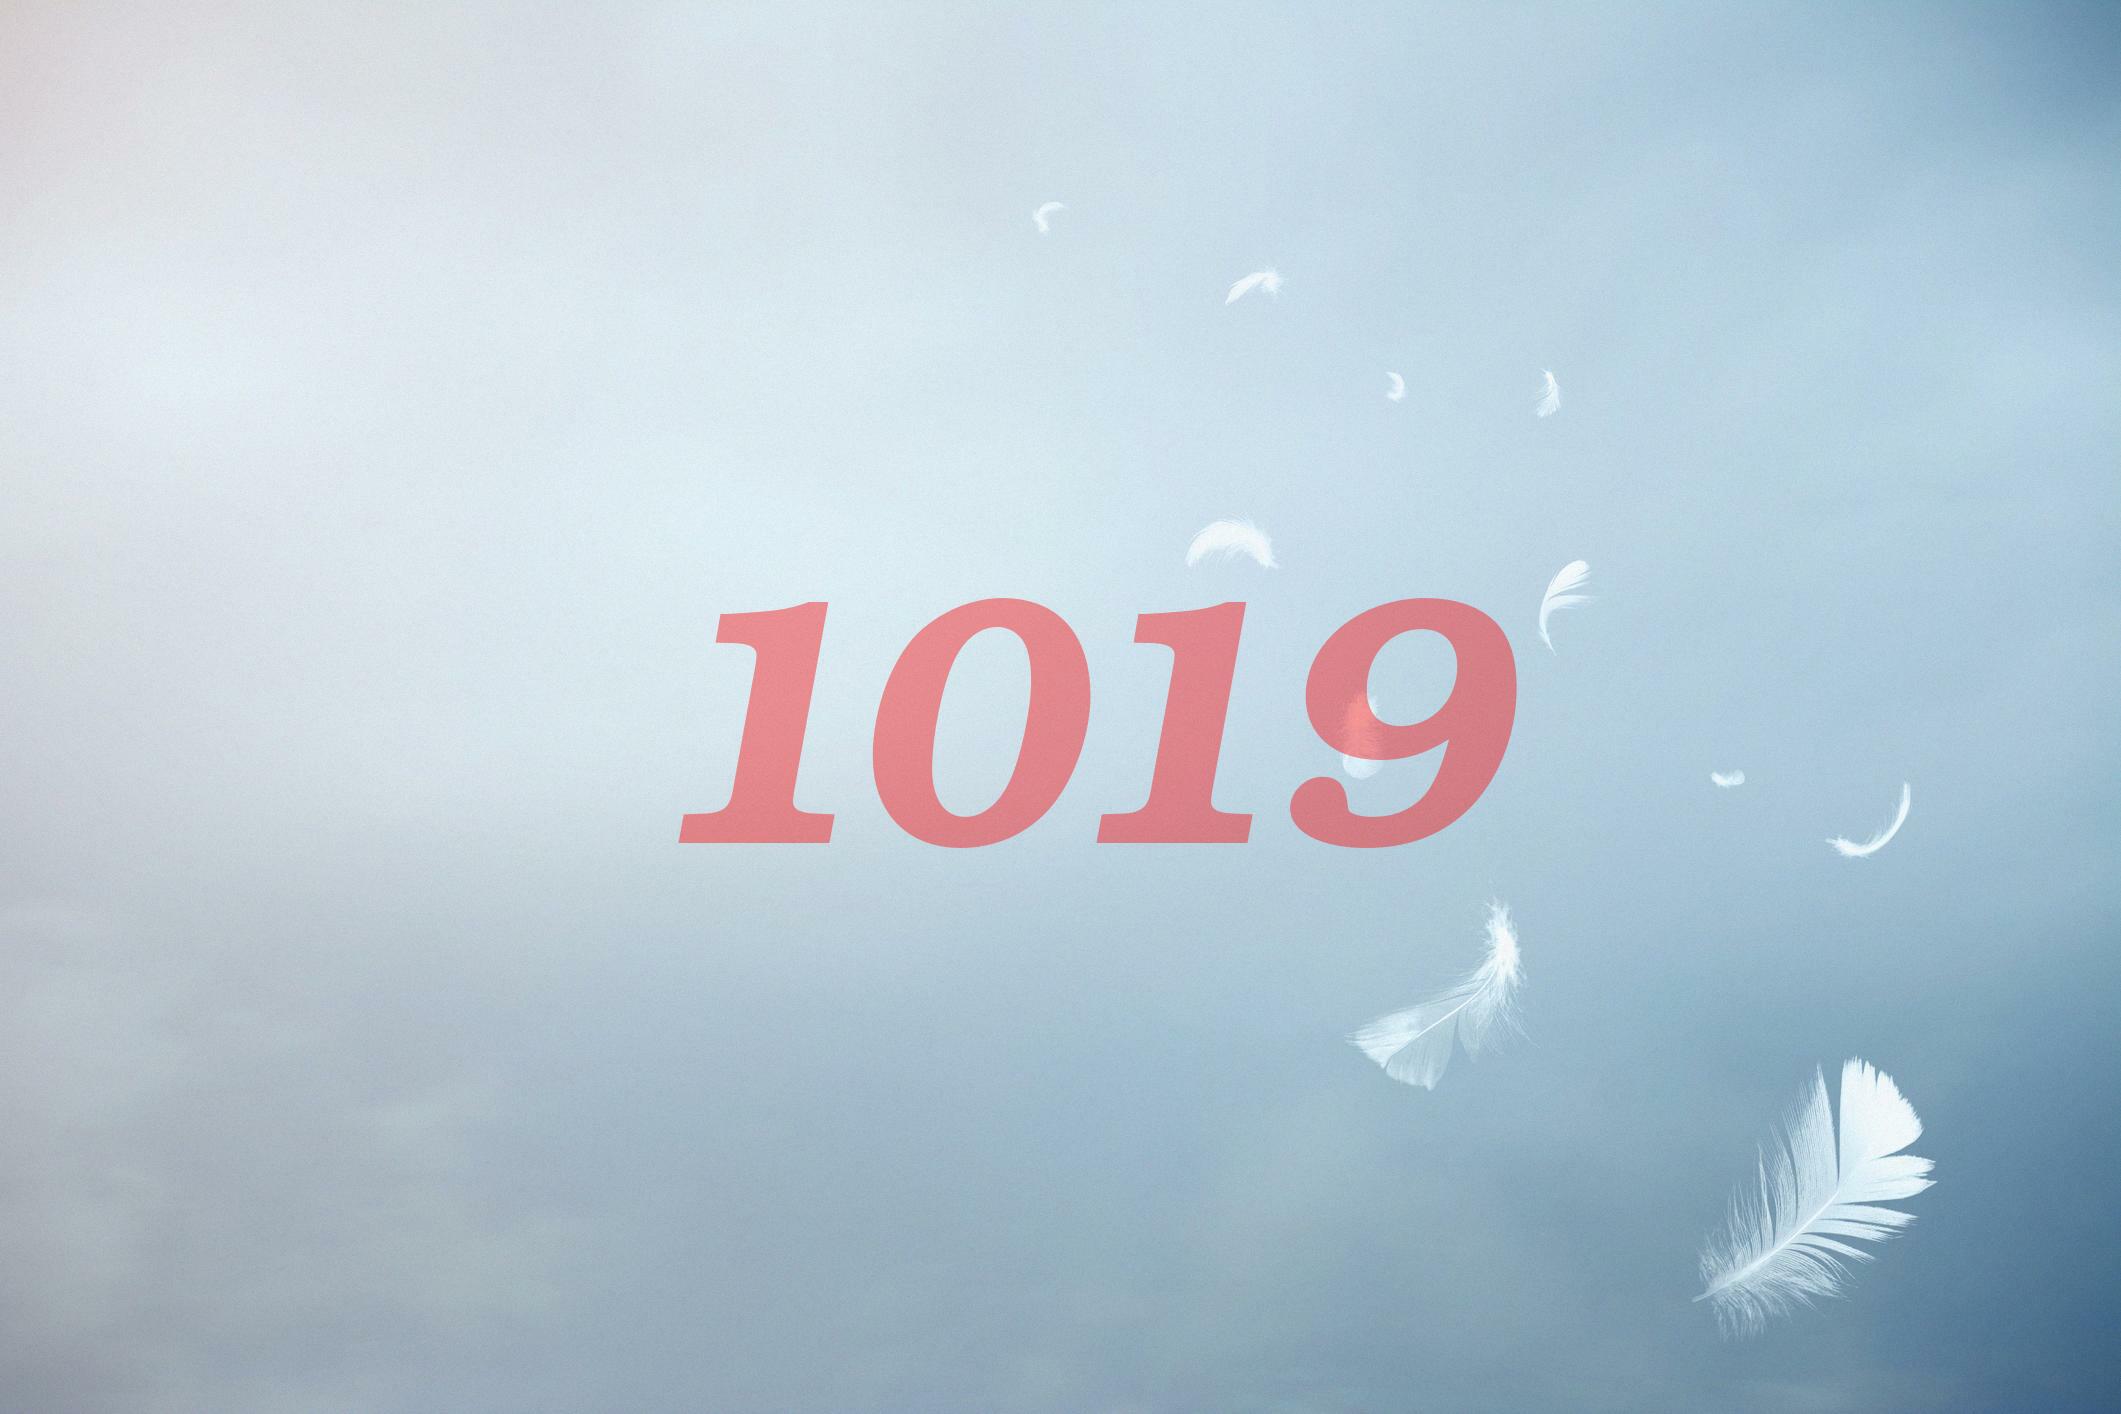 What Is The Spiritual Significance Of The 1019 Angel Number  